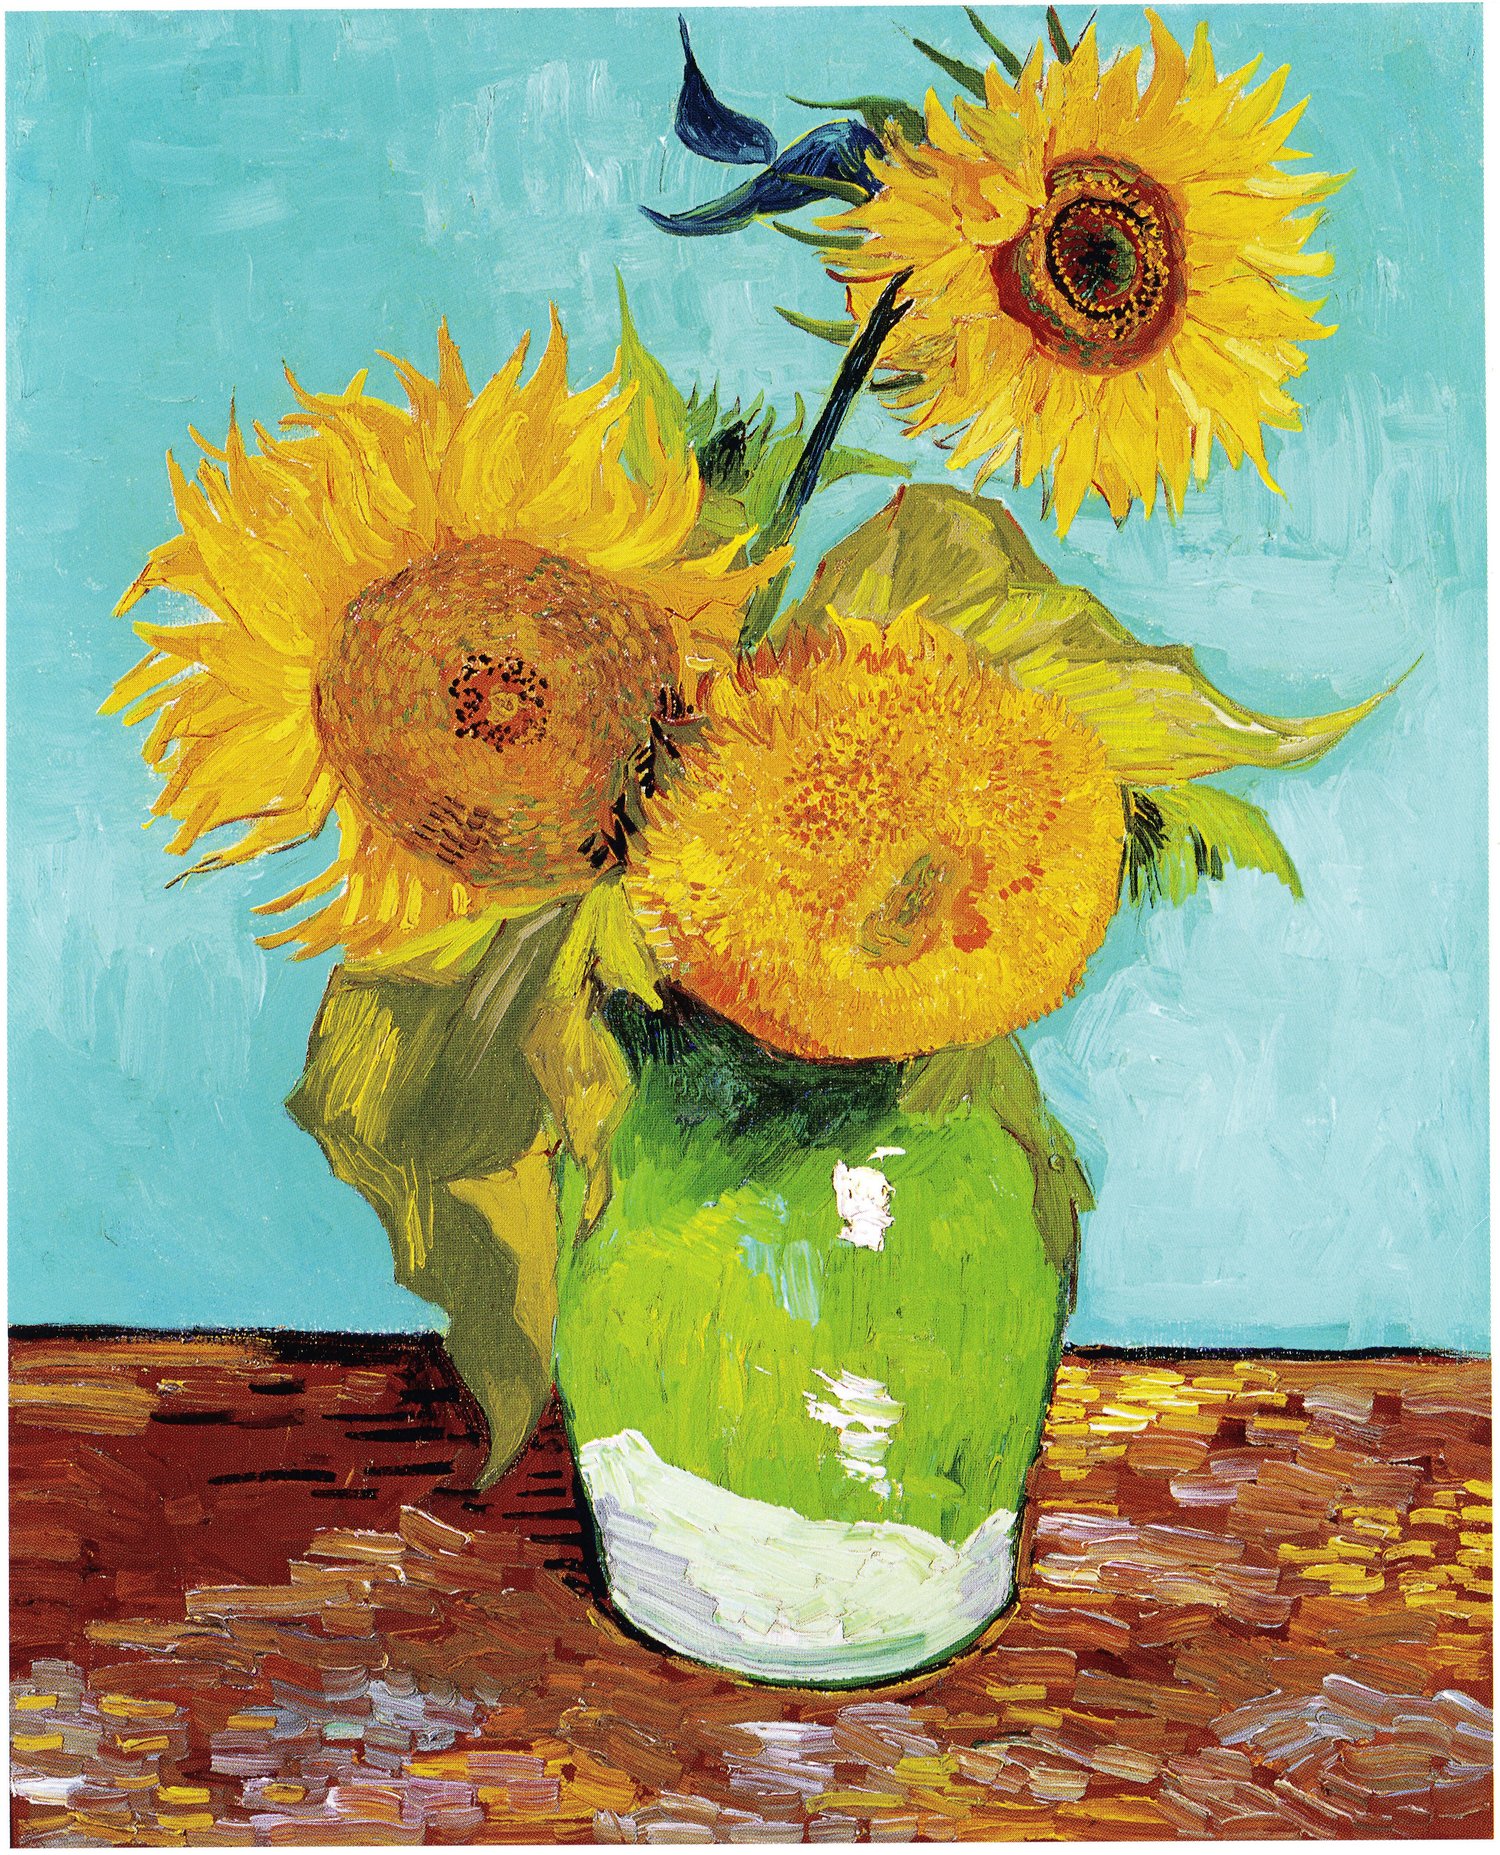 Three Sunflowers by Vincent Van Gogh.